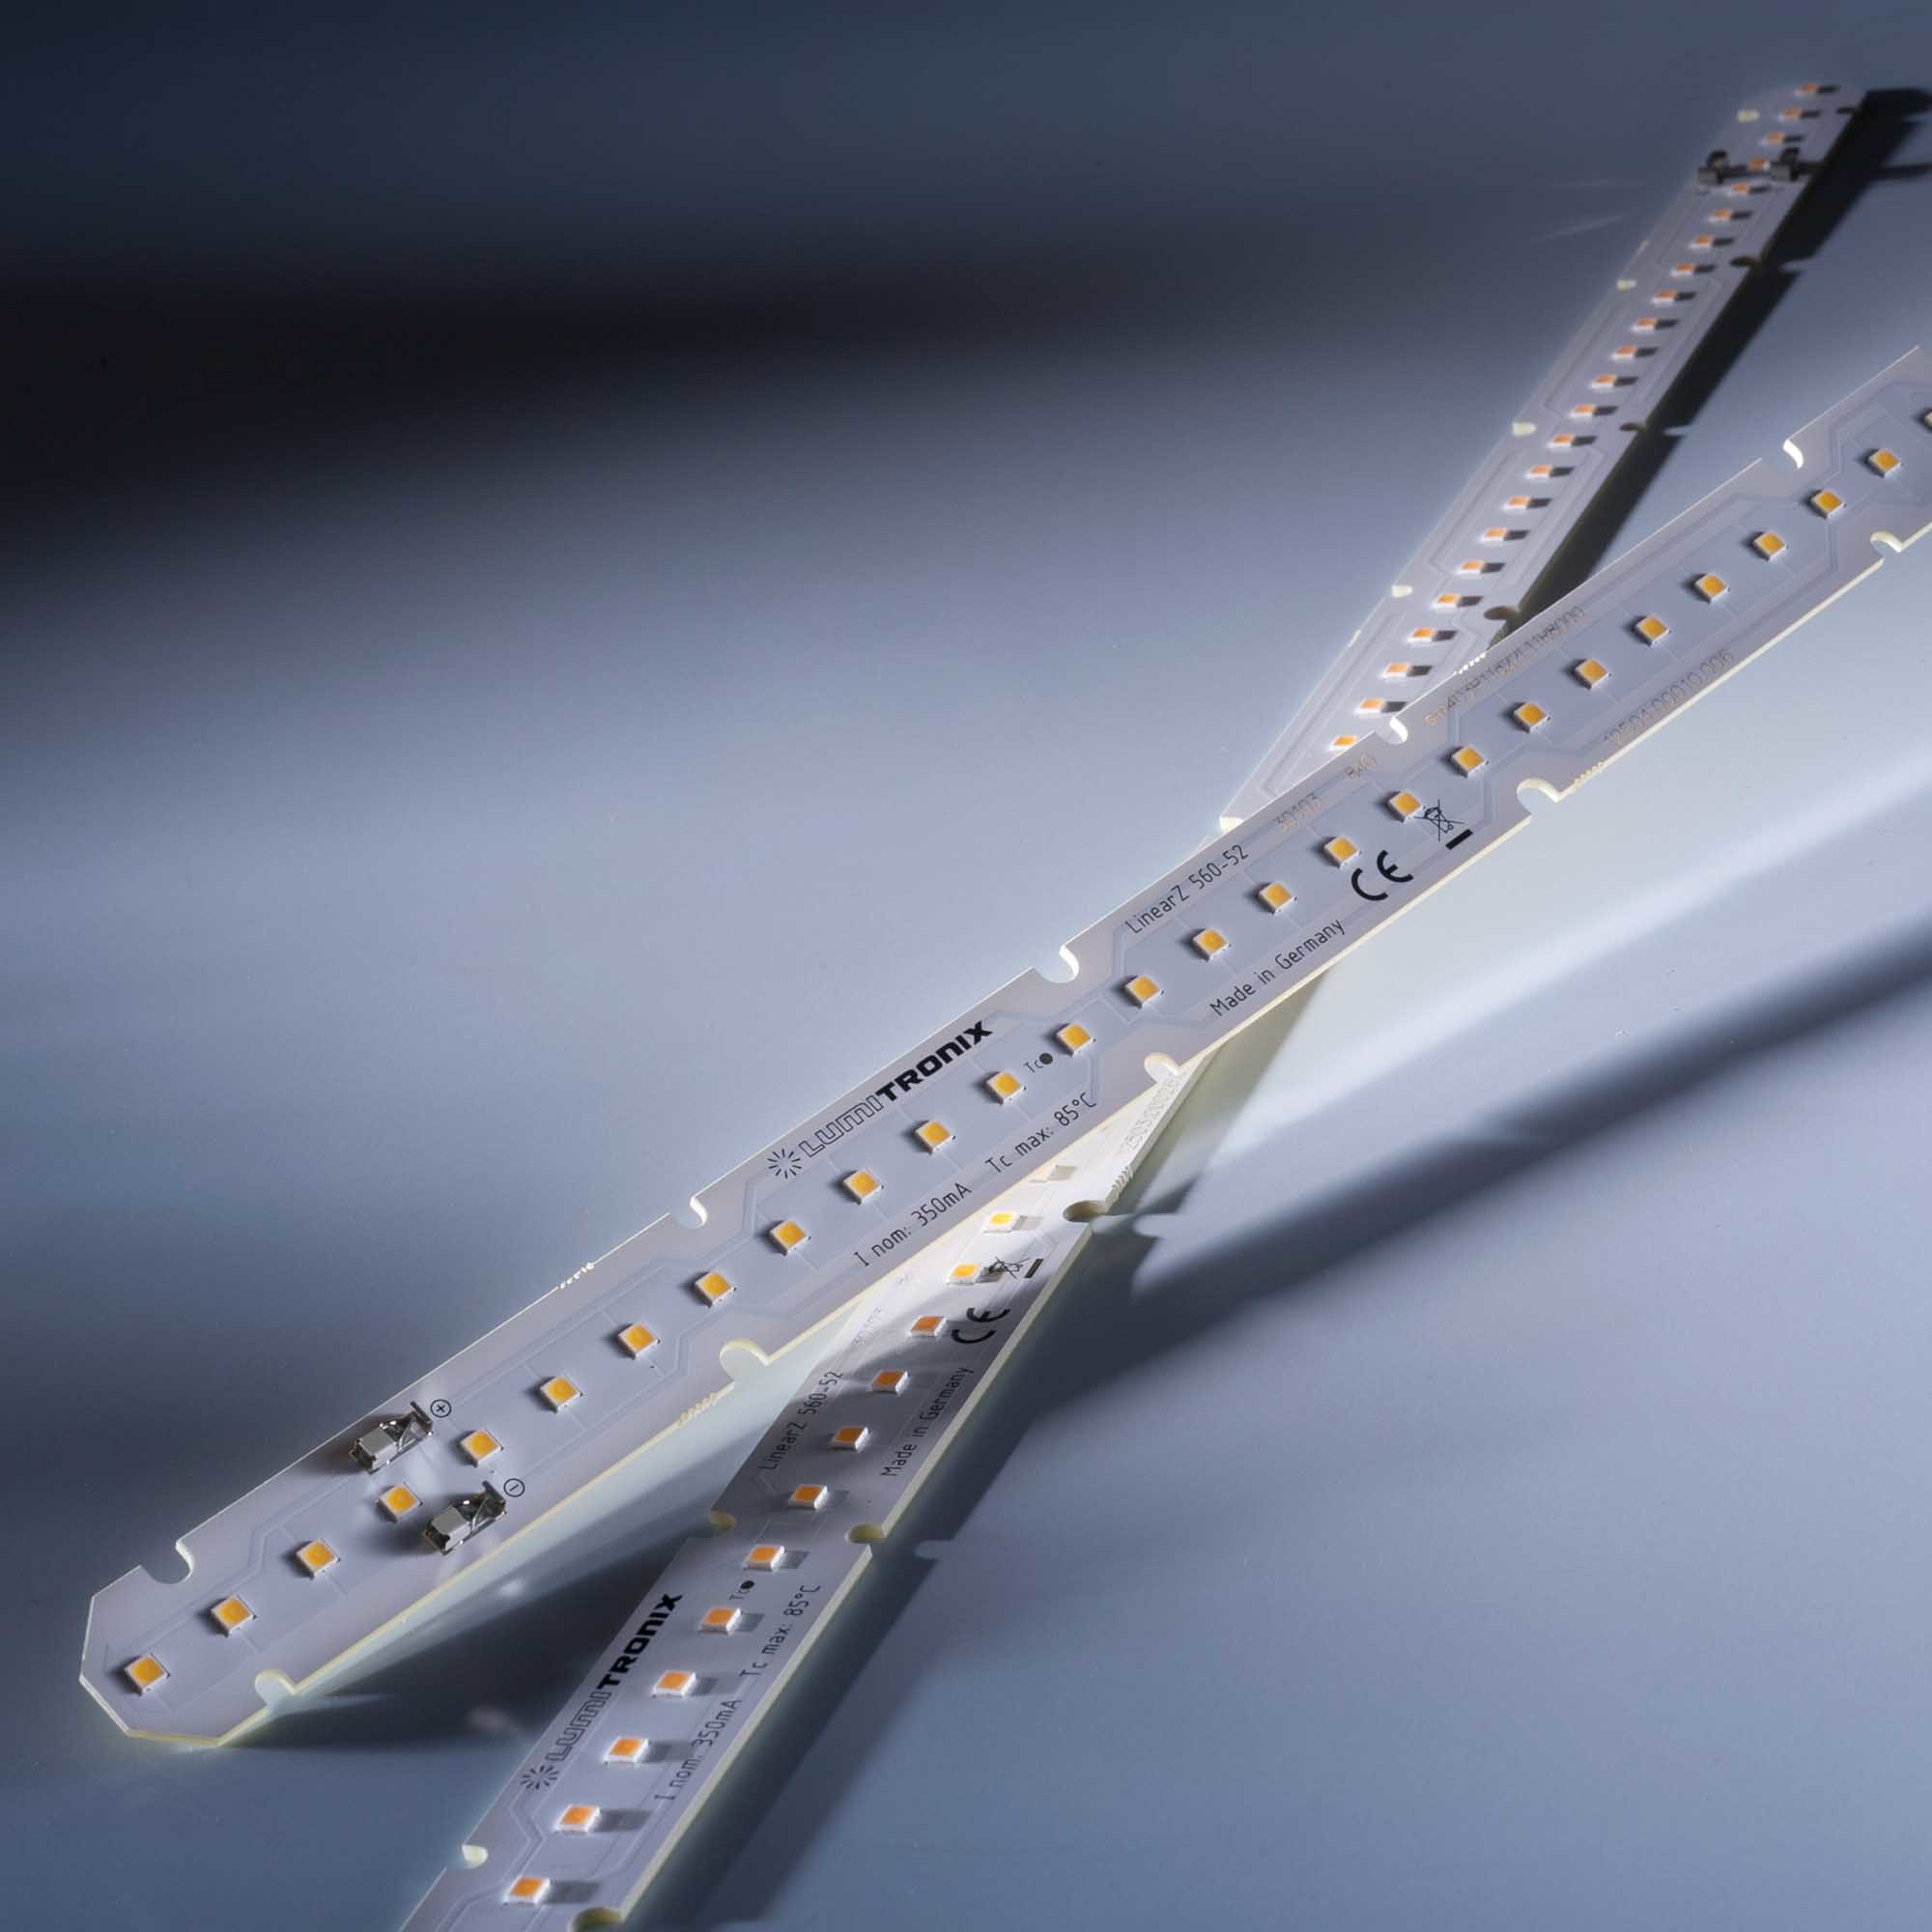 LumiBar-52-RSP Horticulture Nichia Rsp0a LED Strip Zhaga pure white 5000K 28PPF 1780lm 350mA 37.5V 52 LEDs 22.05in/56cm module (969lm/ft 7.2W/ft)